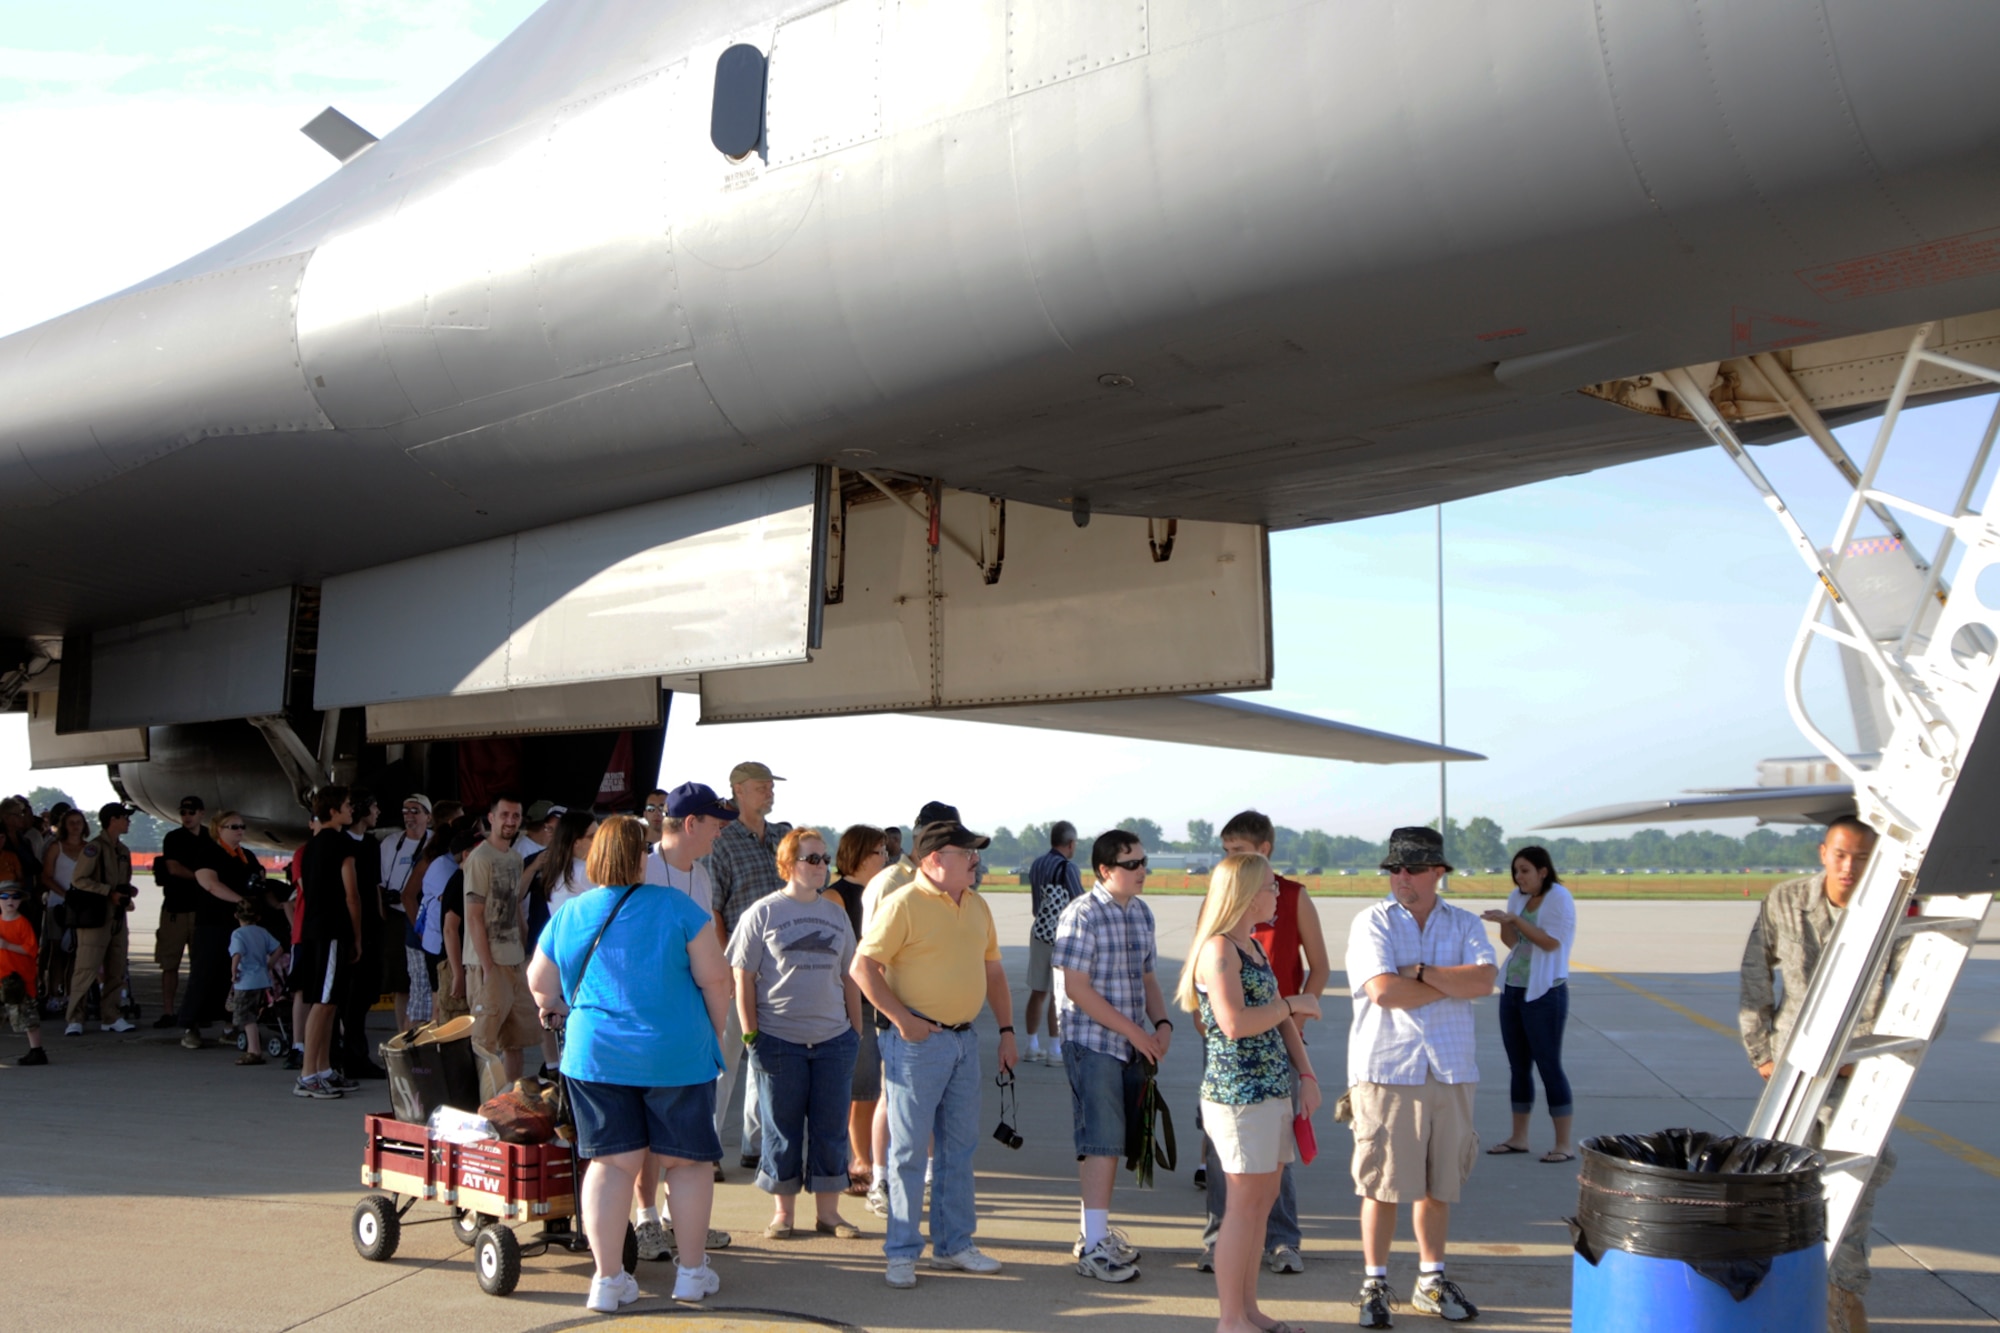 Visitors to the 2011 Selfridge Air Show and Open House stand under the fuselage of a B-1B Lancer, waiting their turn to enter the aircraft via a ladder at Selfridge Air National Guard Base, Aug. 20, 2011. The bomber, based at Dyess Air Force Base, Texas, as part of the 7th Bomb Wing, was on display for the air show. (USAF photo by TSgt. David Kujawa)